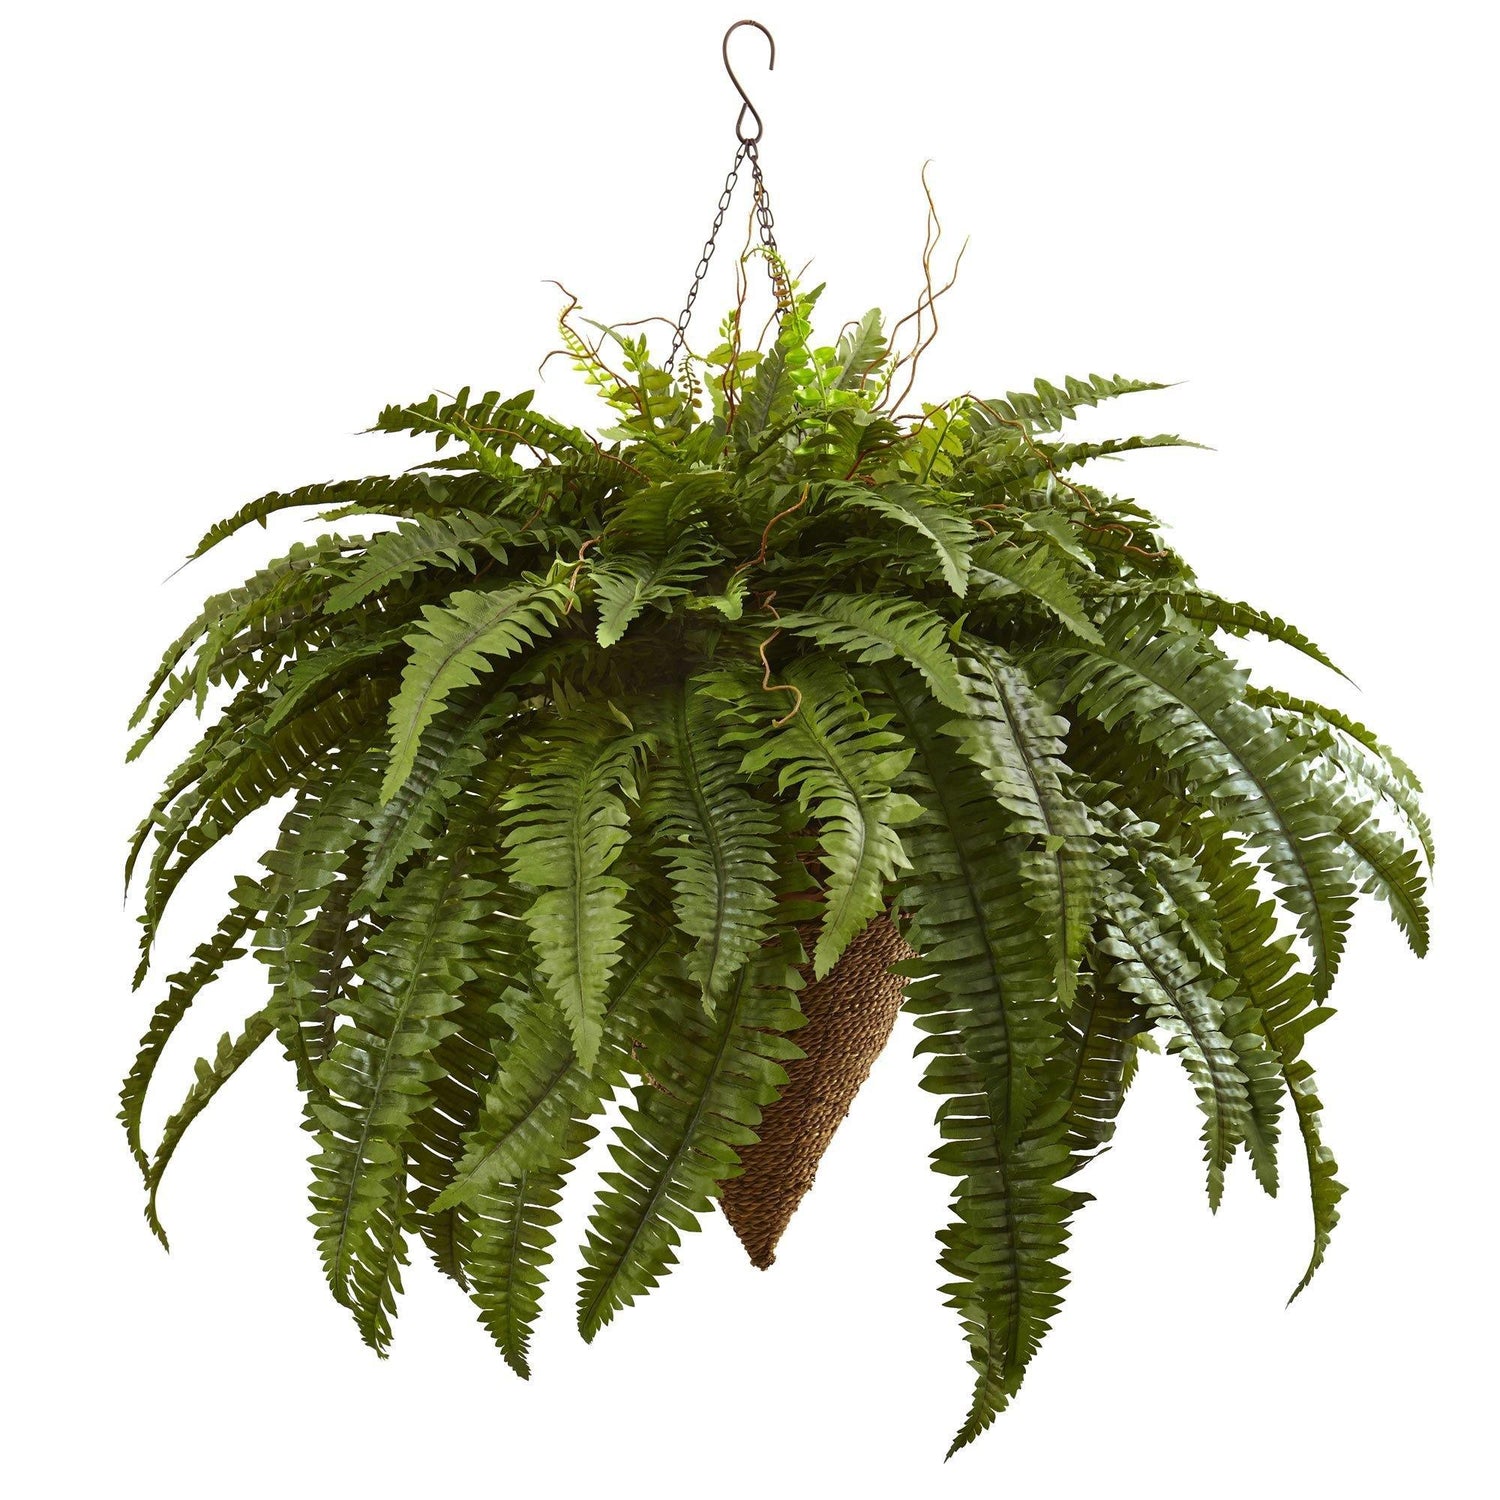 https://cdn.shopify.com/s/files/1/0108/9460/6436/products/artificial-26-artificial-giant-boston-fern-with-cone-hanging-basket-nearly-natural-803118.jpg?v=1584156978&width=1500